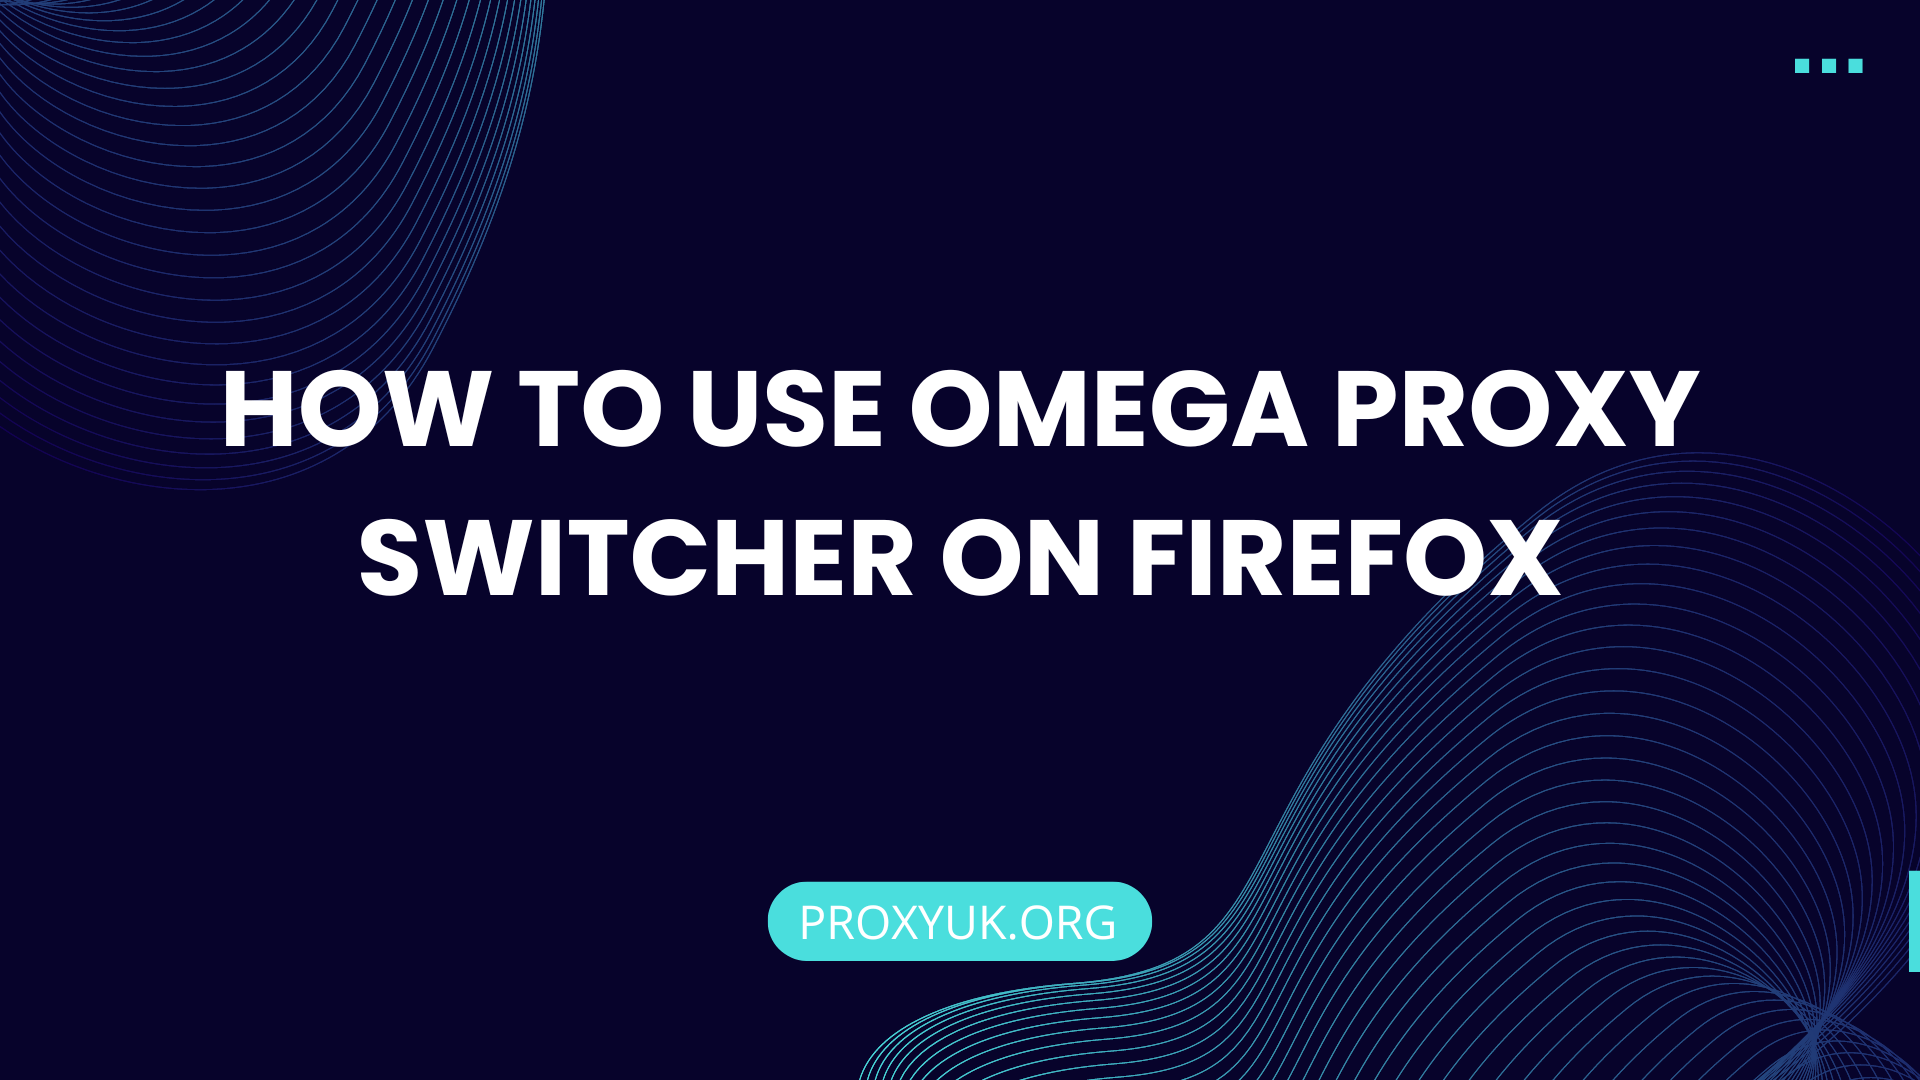 How to use Omega Proxy Switcher on Firefox